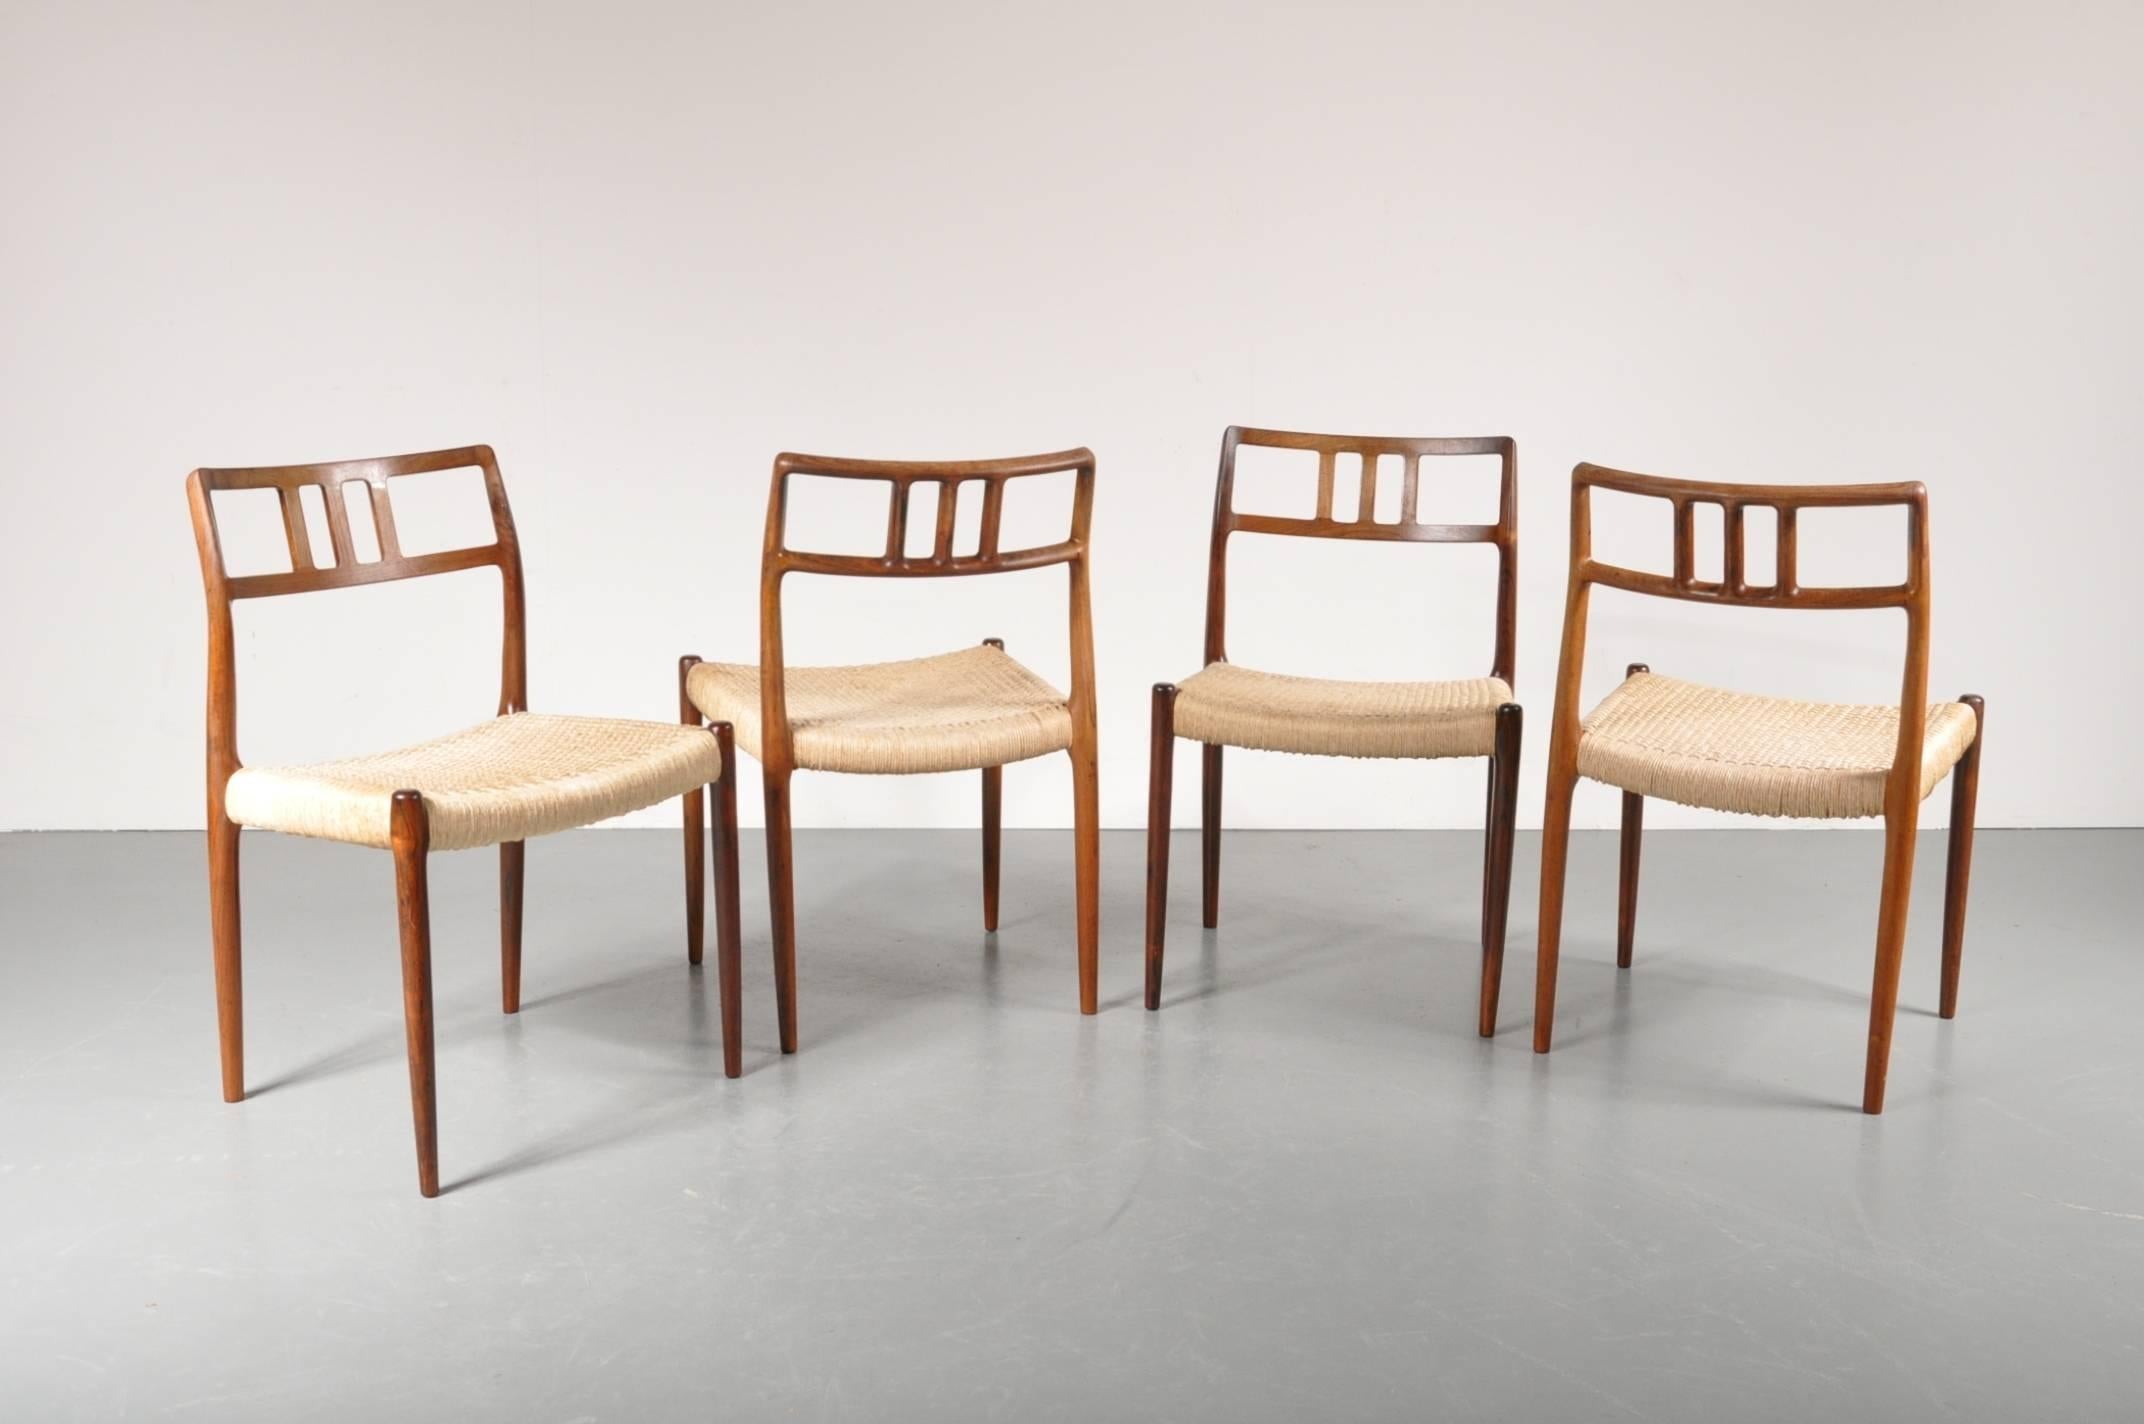 Beautiful set of four Model 79 dining chairs designed by Niels Otto Møller, manufactured by Møller in Denmark, circa 1960.

An outstanding design by popular Danish designer Møller, made with a wonderful touch of luxury. These chairs are made of